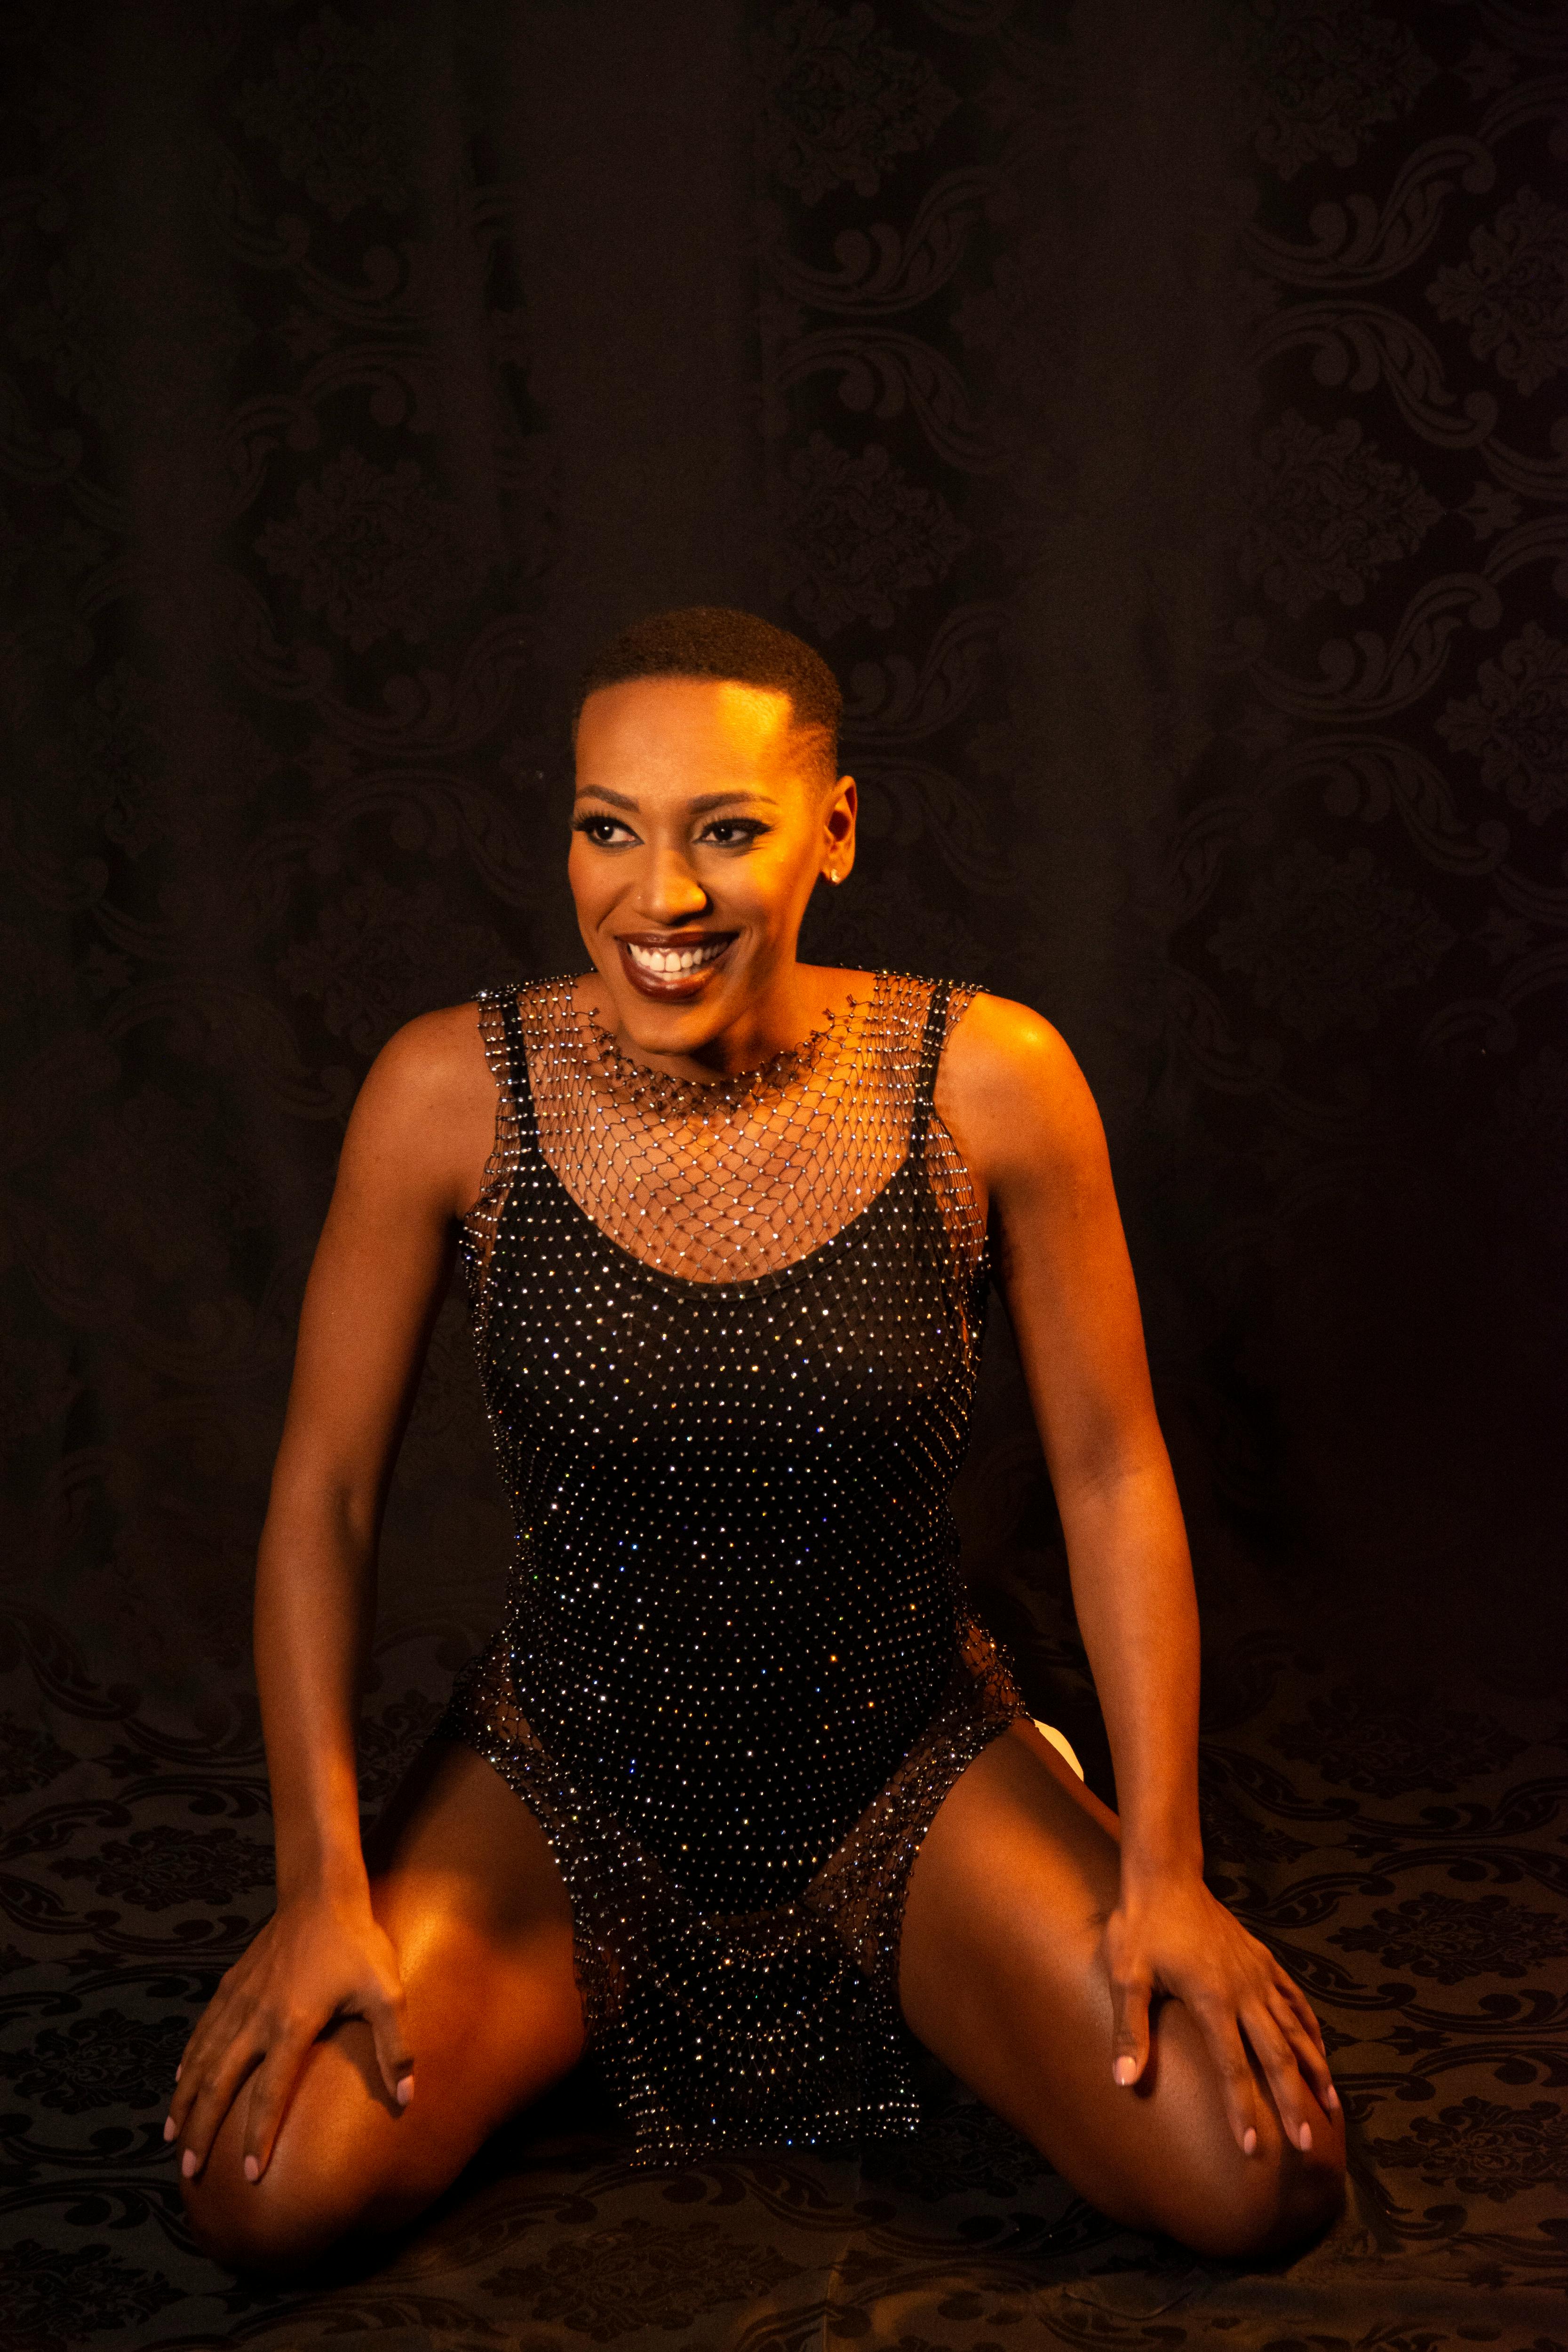 Person Wearing Makeup and a Glittery Bodysuit Posing and Smiling